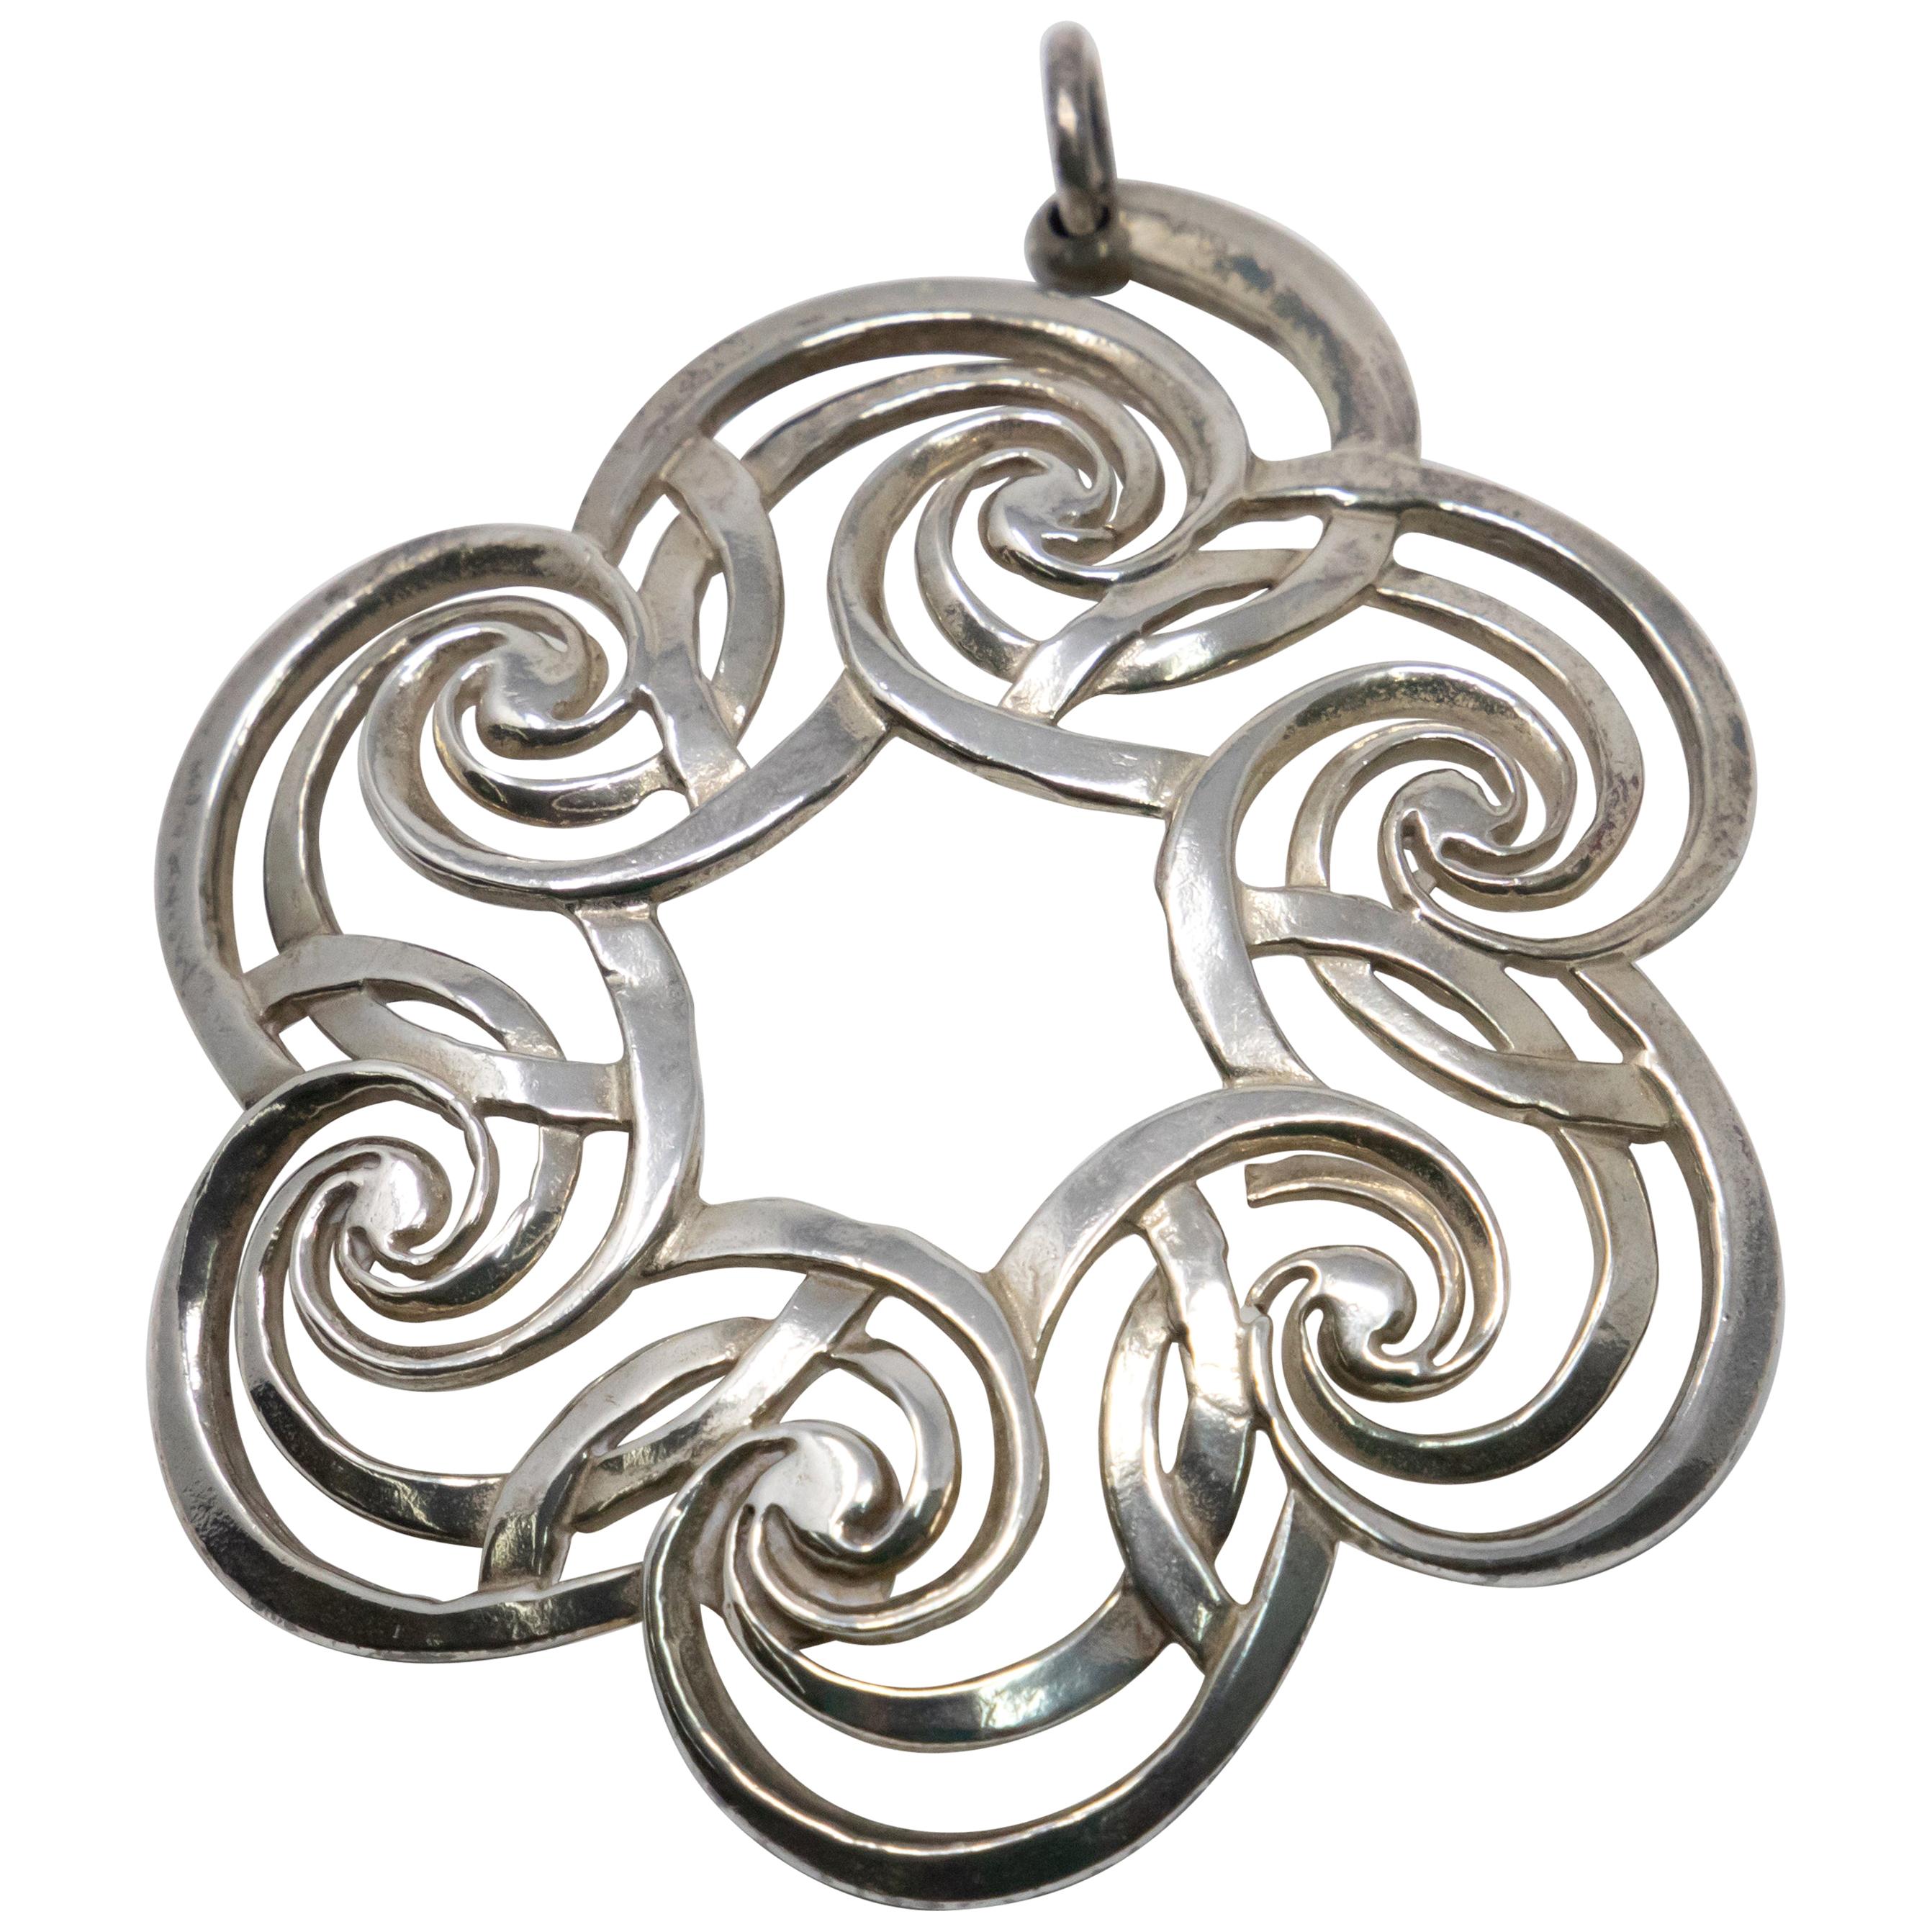 Lunt Sterling Wreath Ornament, 2001 For Sale